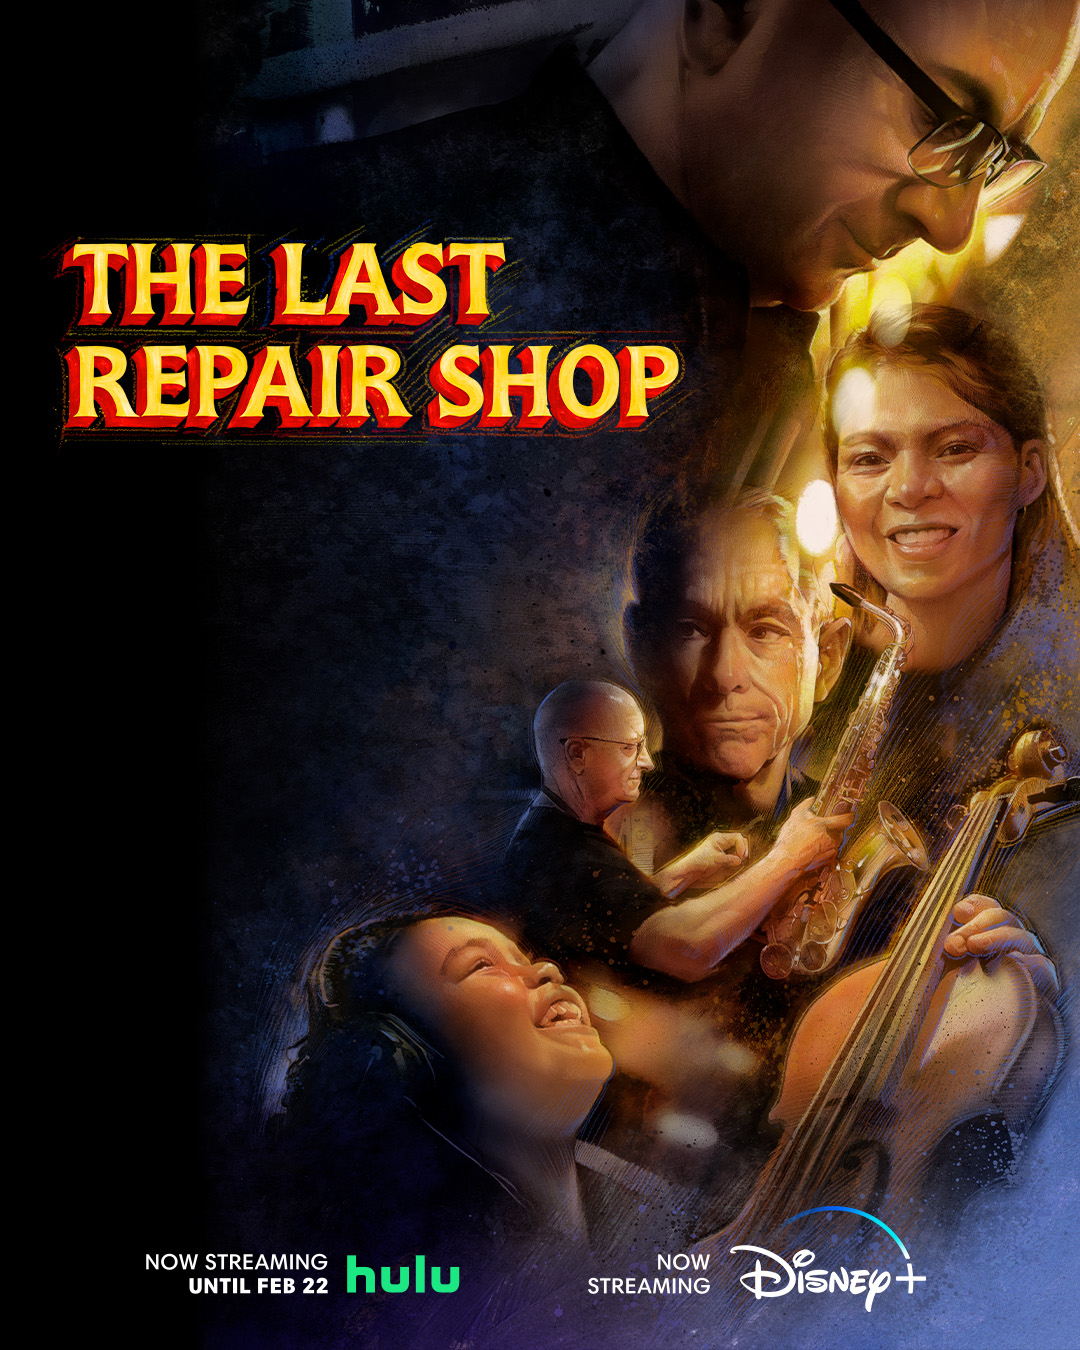 Disney+ on X: "A symphony of craftsmanship. The Last Repair Shop brings to  you a tale of keeping the musical spirit for countless students in Los  Angeles. #TheLastRepairShop, nominated for an Academy